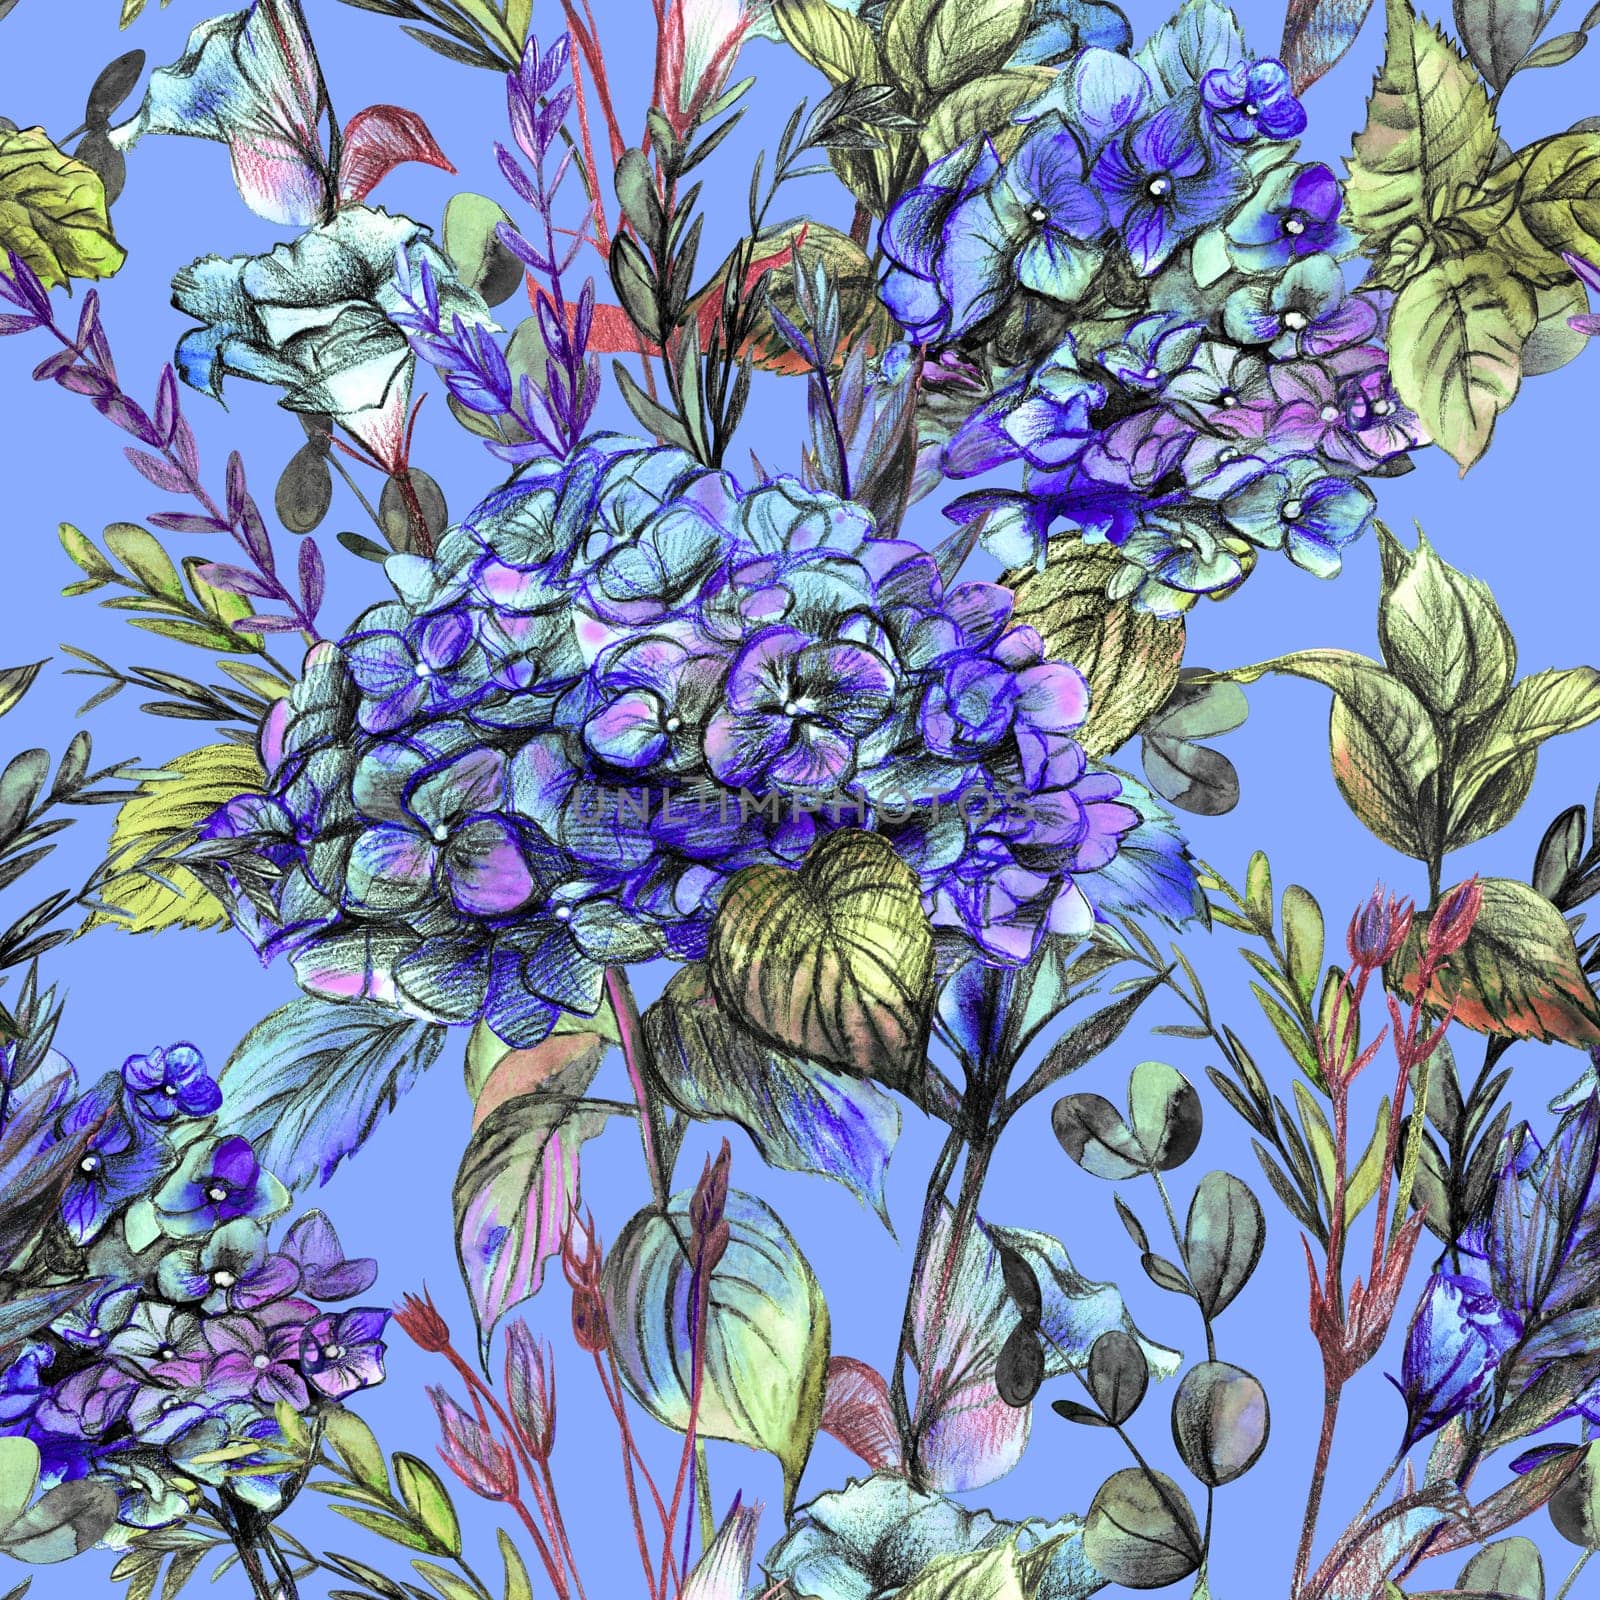 Botanical summer pattern in blue shades with realistic hydrangea flowers painted with watercolor and pencil. Trendy retro designs for summer testing and surface designs. Seamless print of realistic silhouettes of flowers